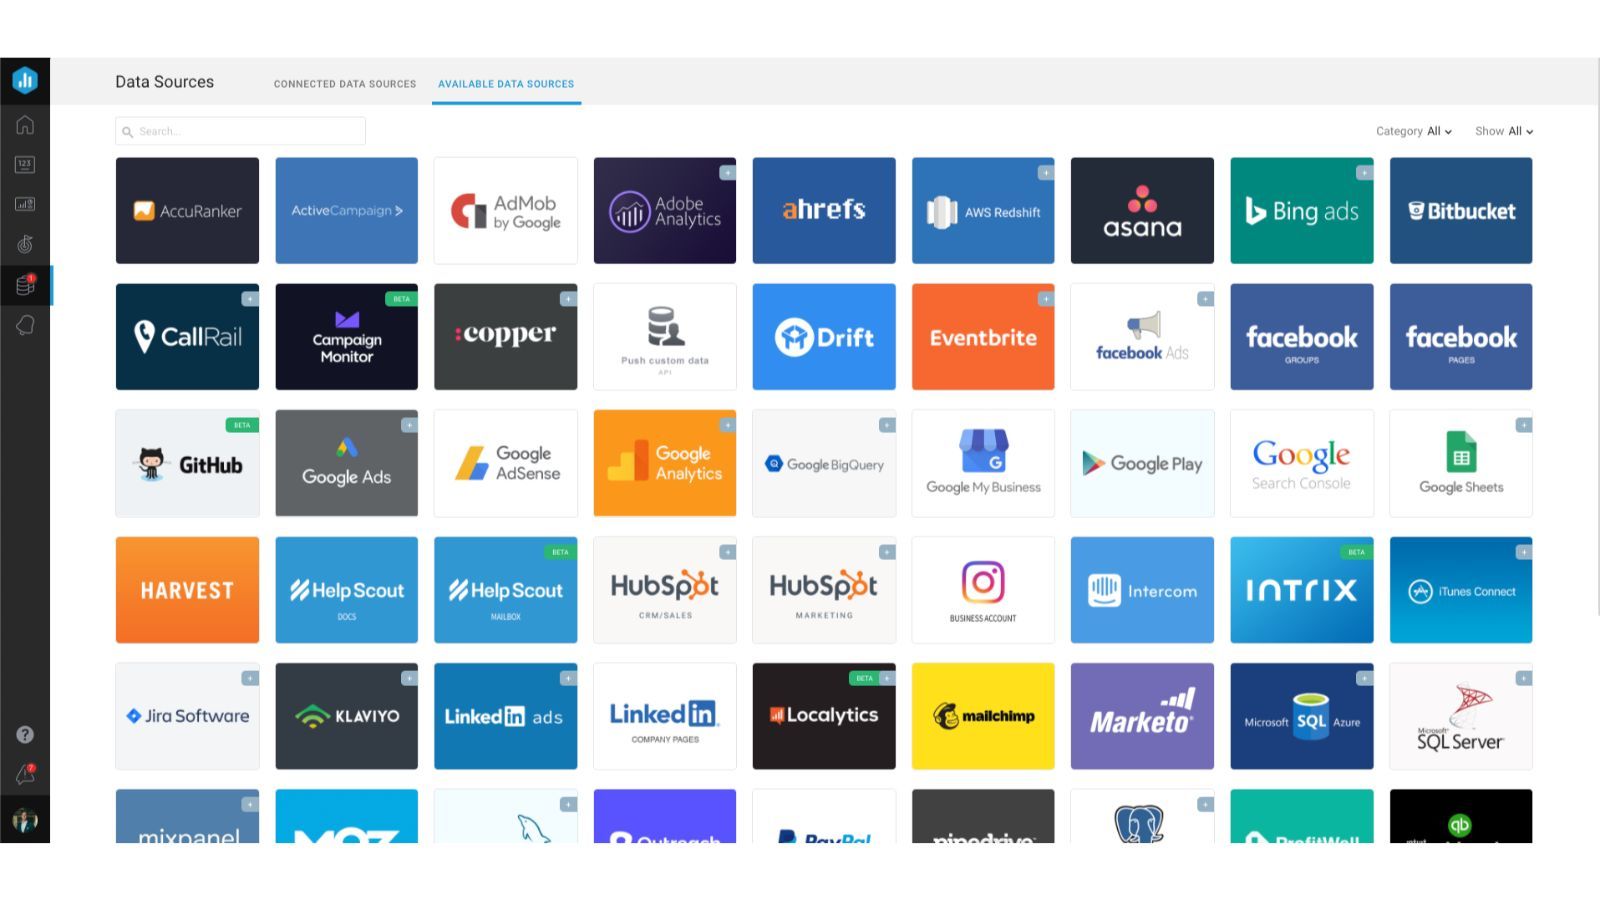 Connect your data through any of our 70+ one-click integrations.